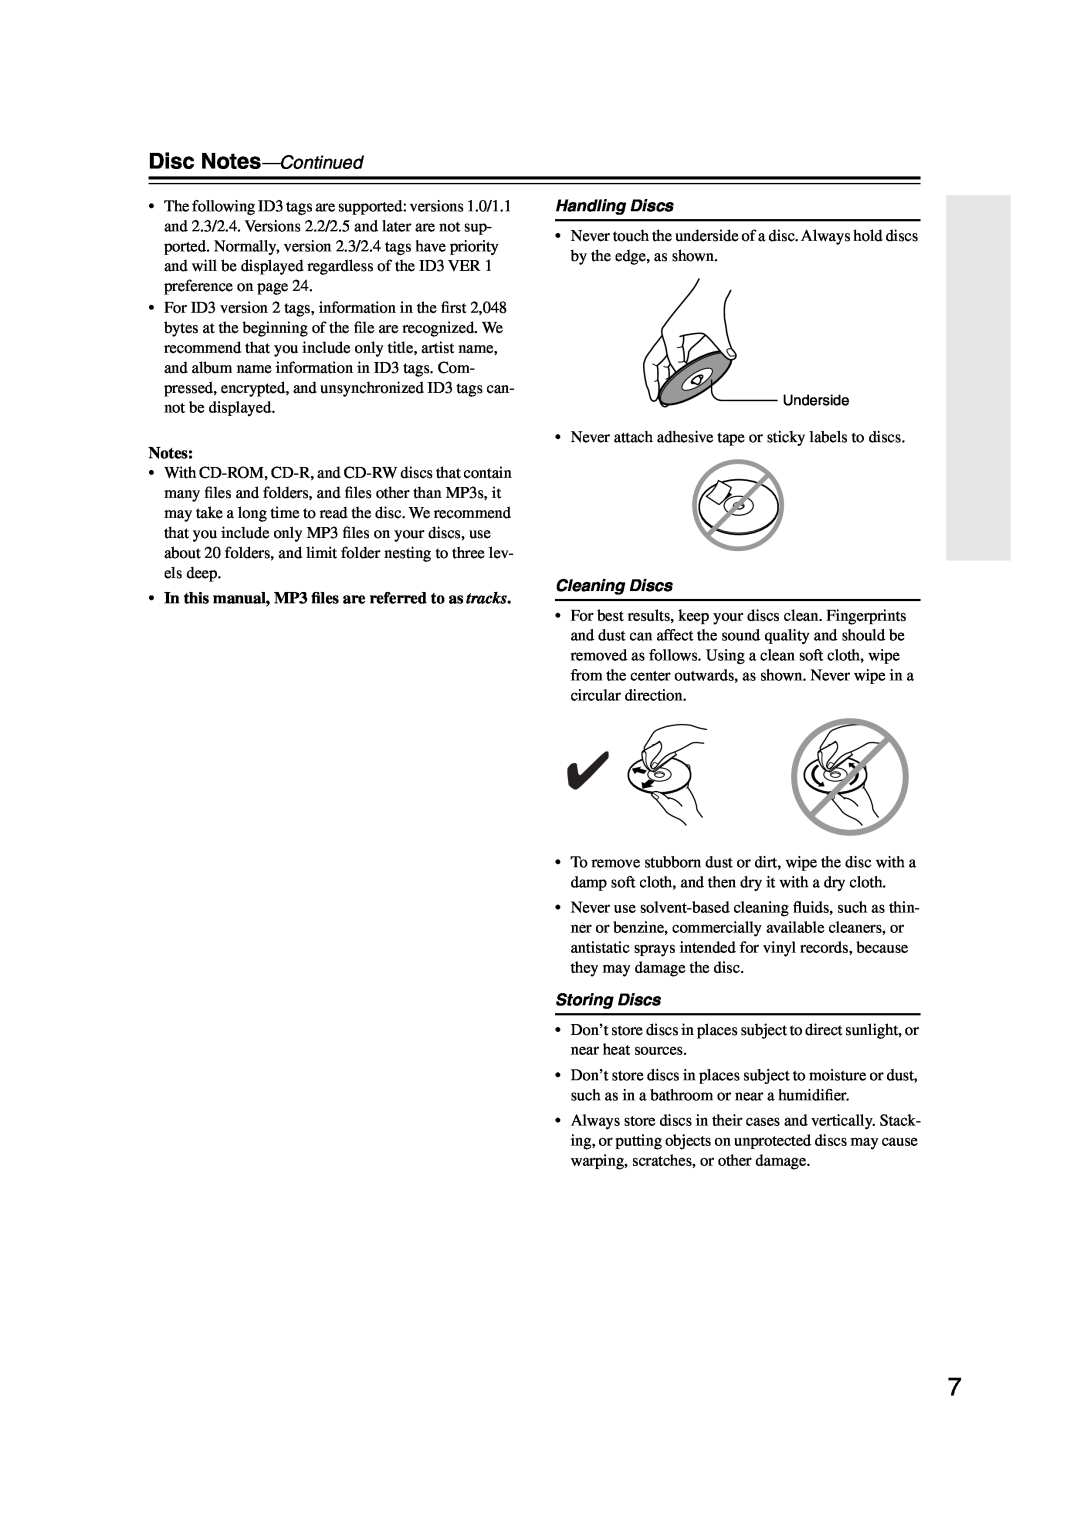 Onkyo DX-C390 instruction manual Disc Notes-Continued, Handling Discs, Cleaning Discs, Storing Discs 